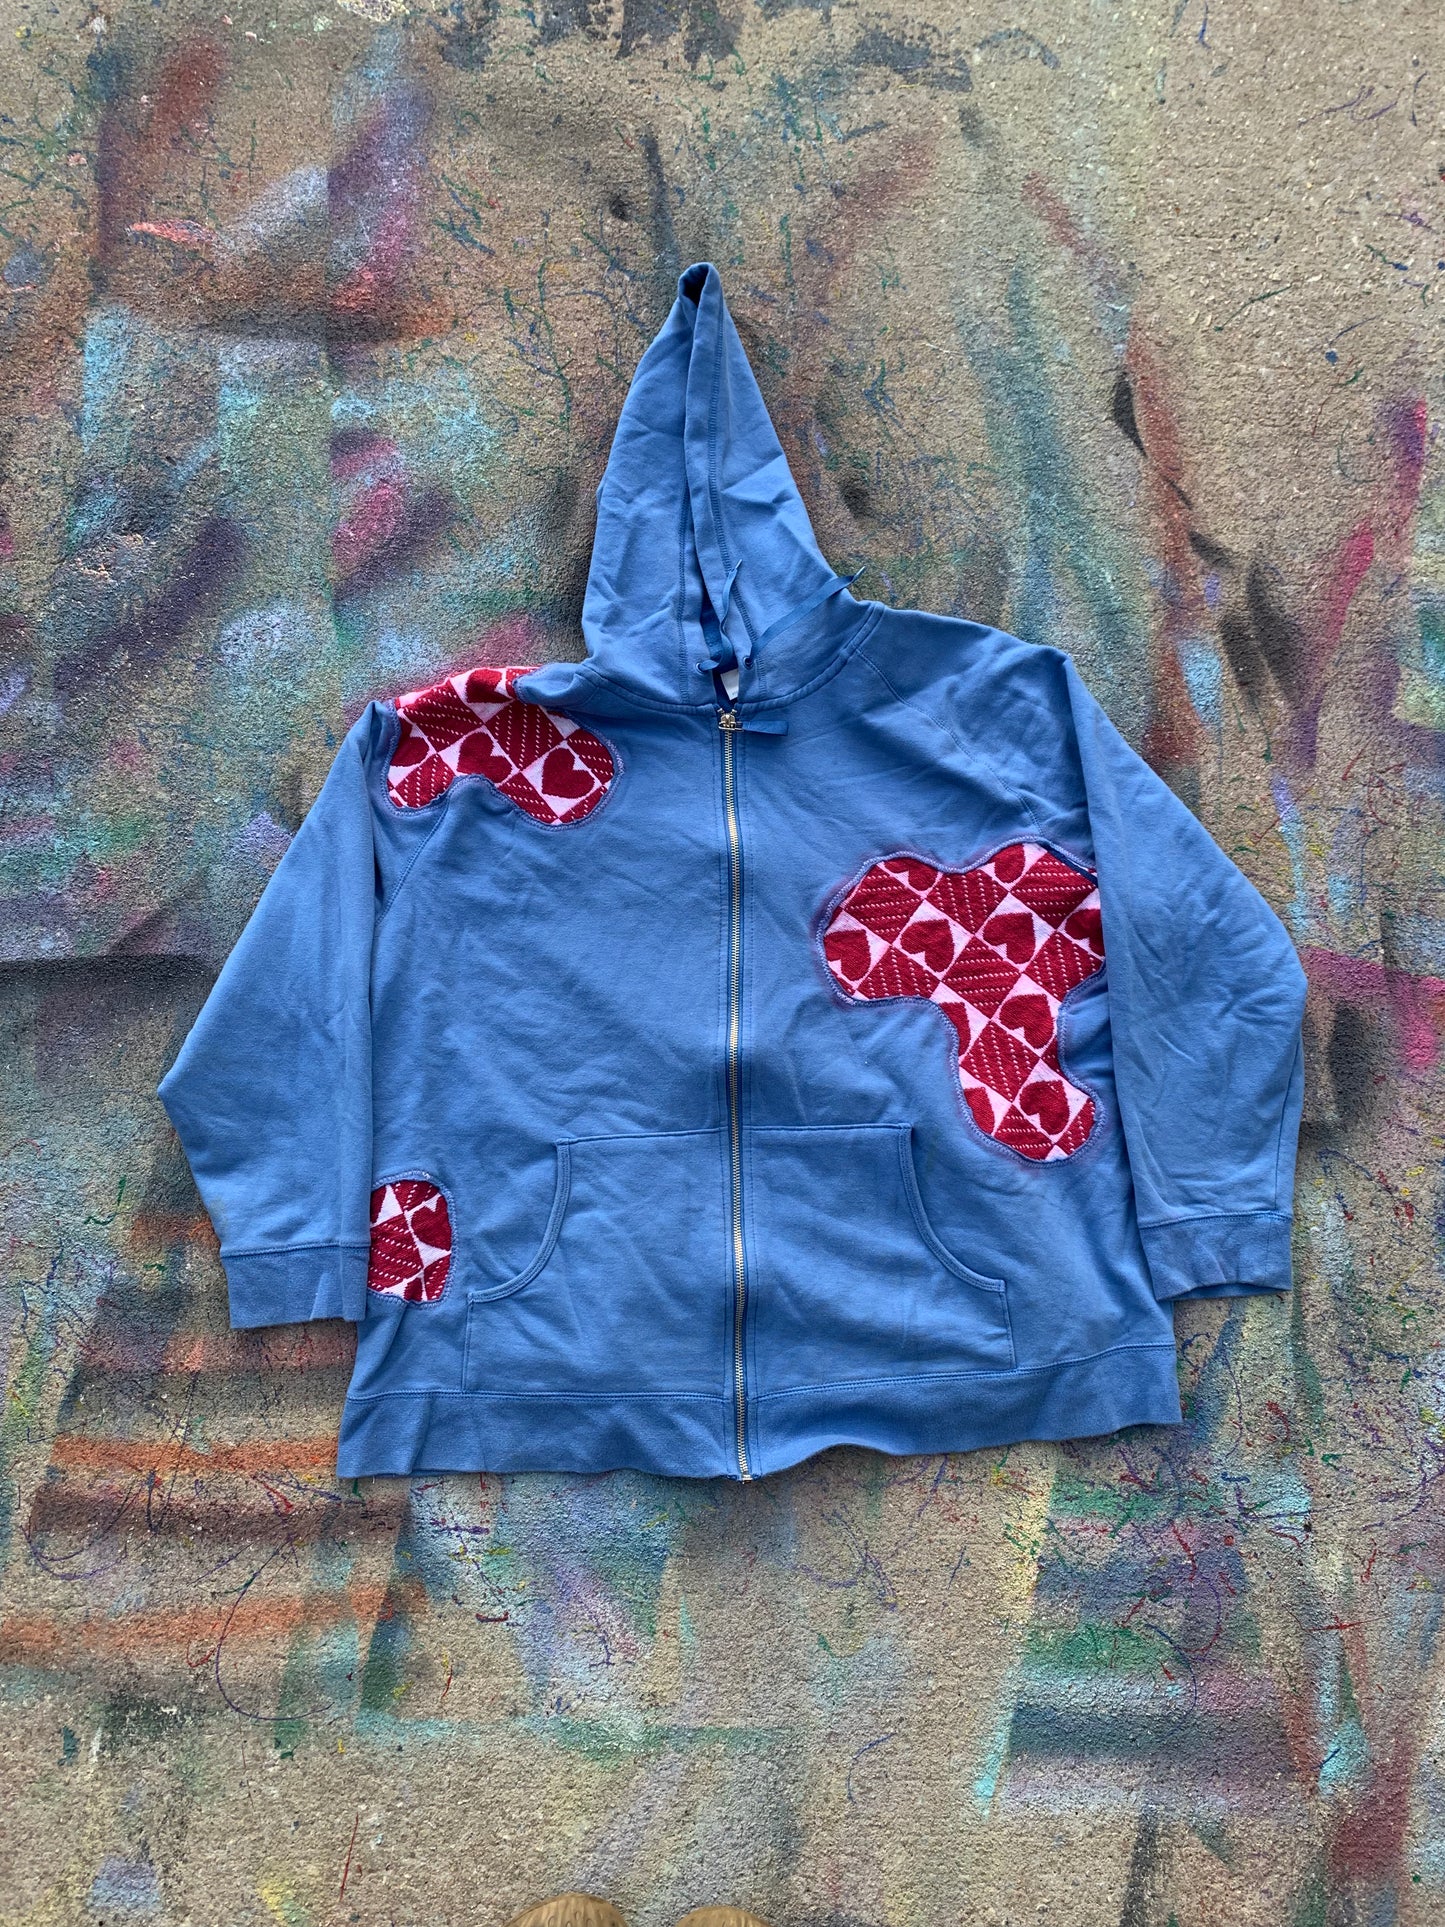 Scab Patches Zip Up Hoodie (Red/White/Baby Blue) - XL